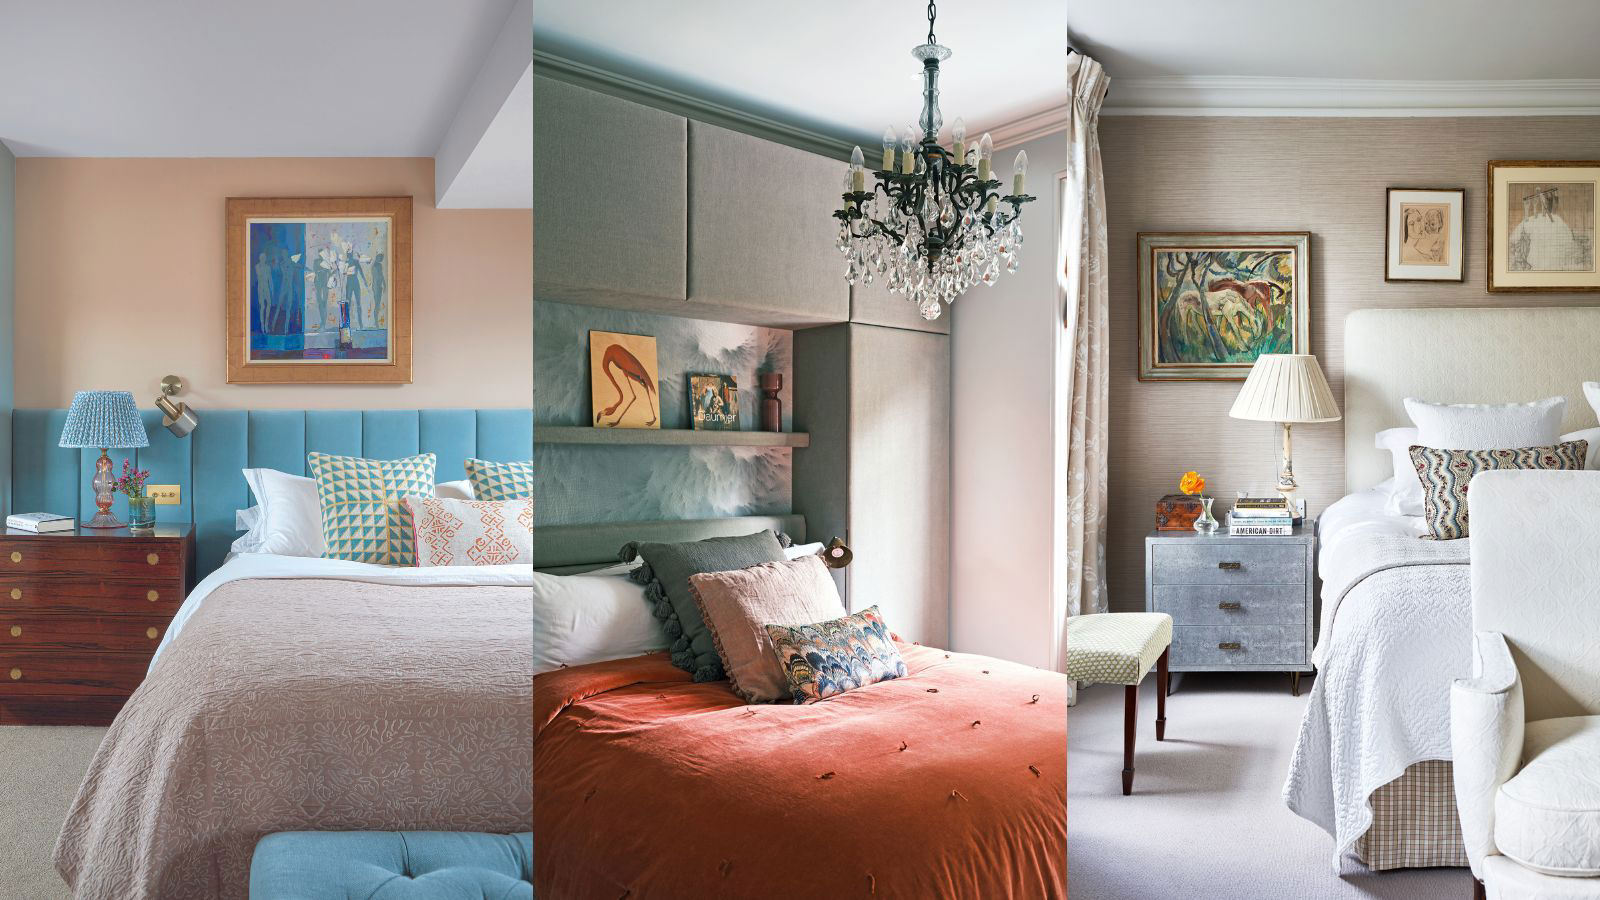 How to make a small bedroom look bigger – 16 tips from design experts